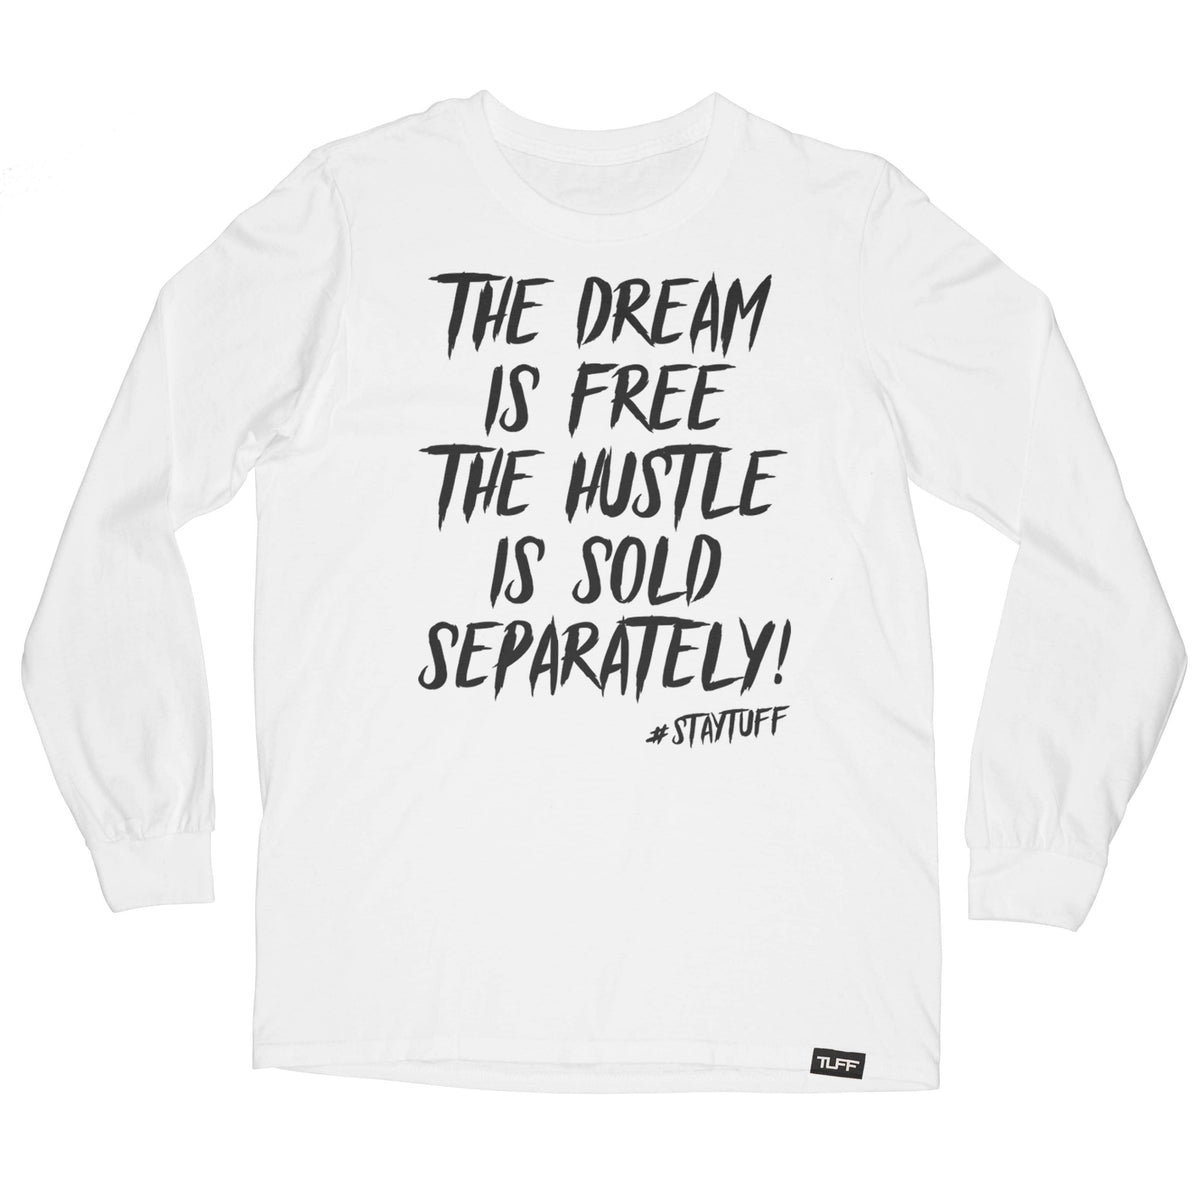 The Dream Is Free The Hustle Is Sold Separately Long Sleeve Tee S / White TuffWraps.com